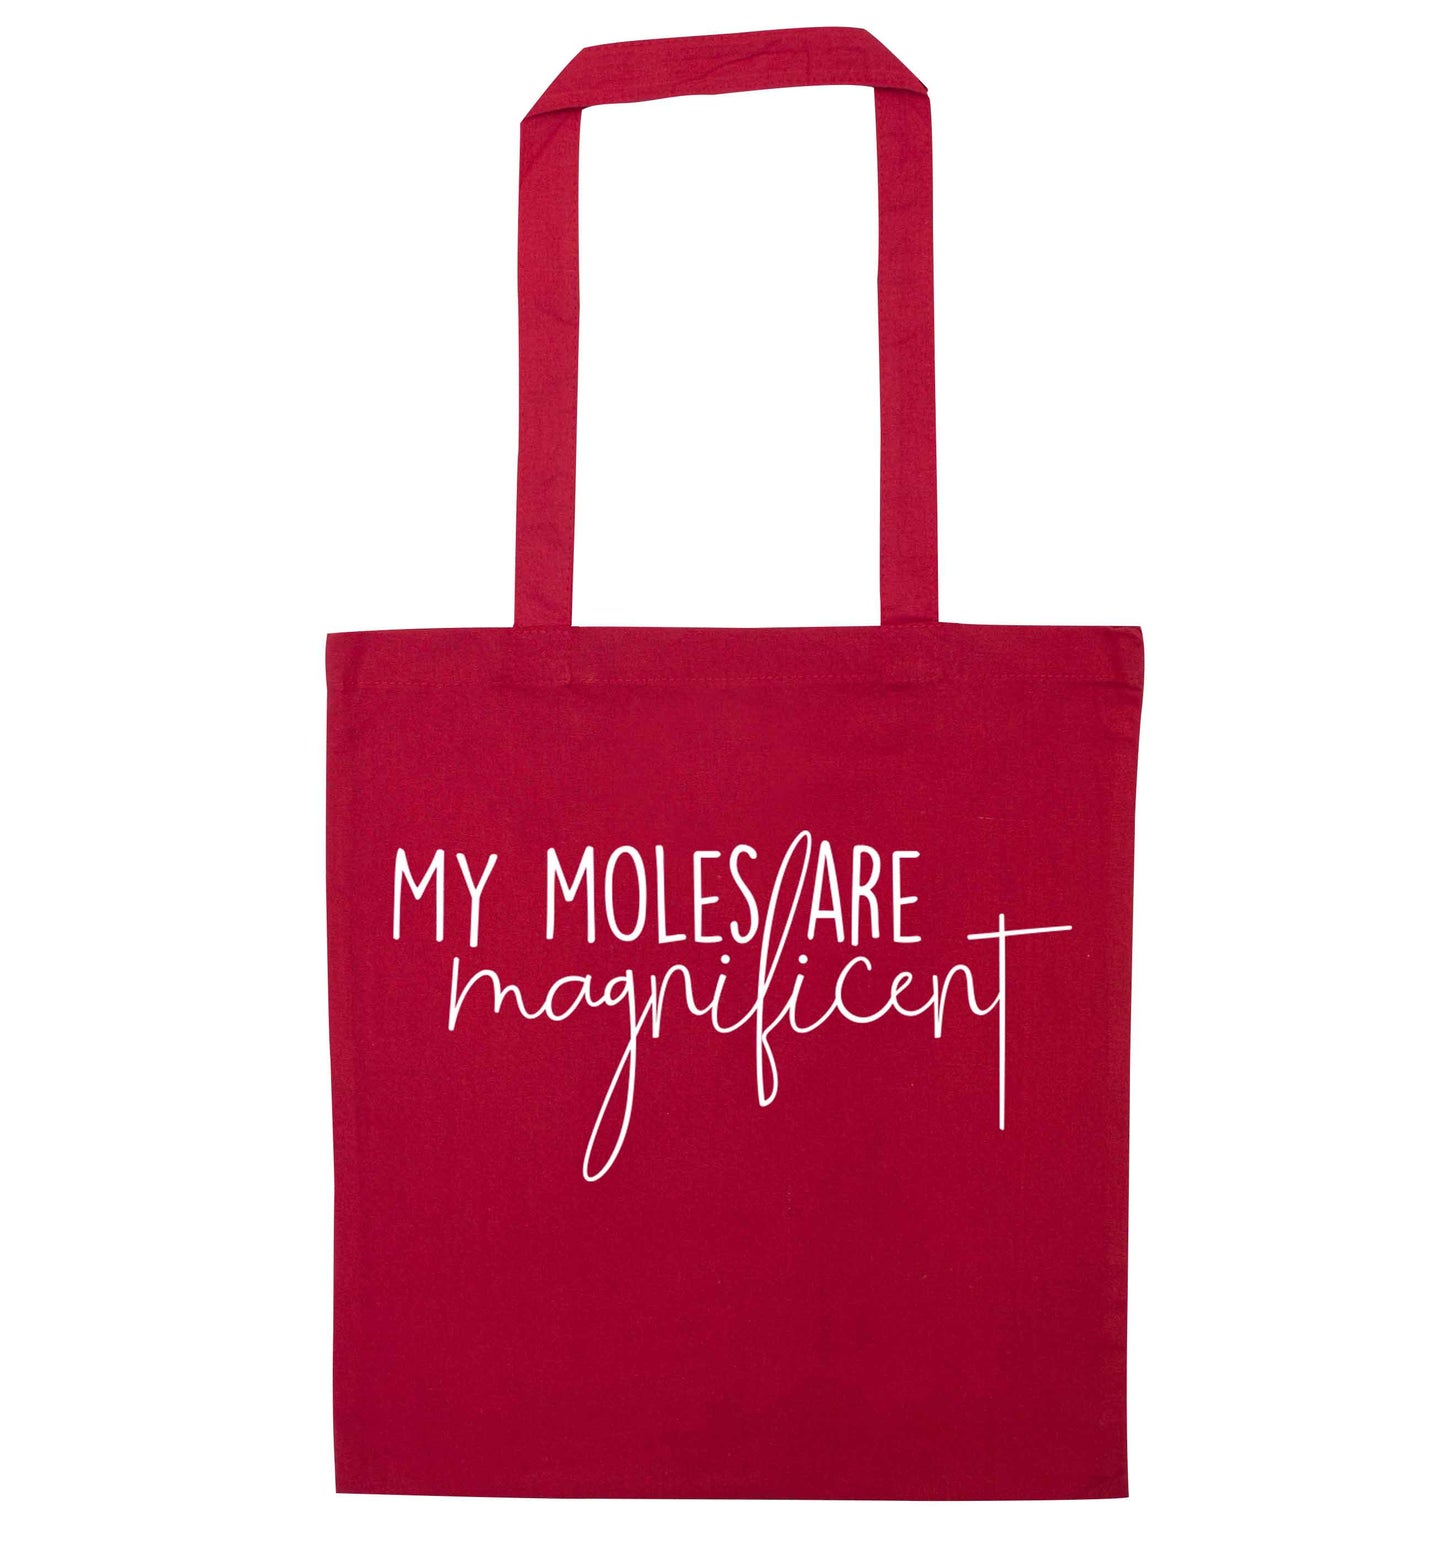 My moles are magnificent red tote bag